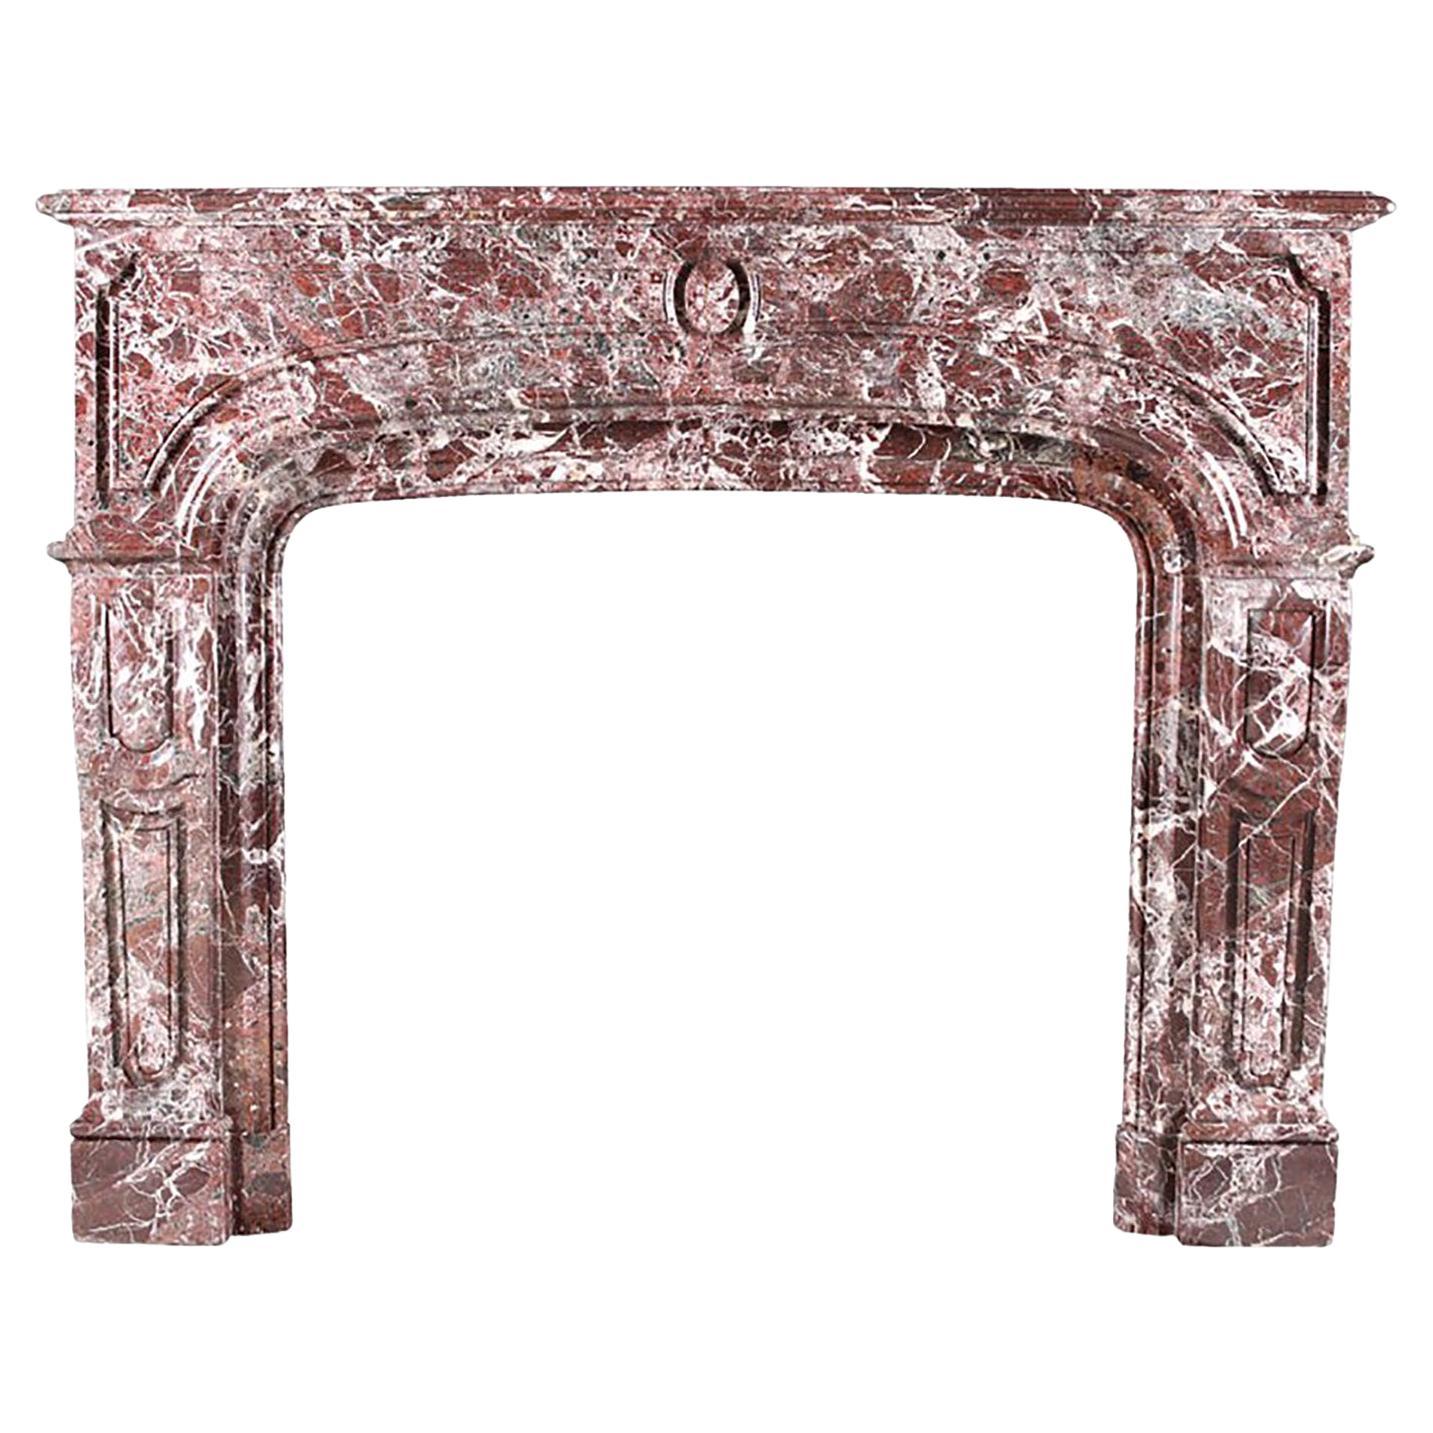 Antique Louis XIV Regency Chimneypiece in Red Levanto Marble For Sale